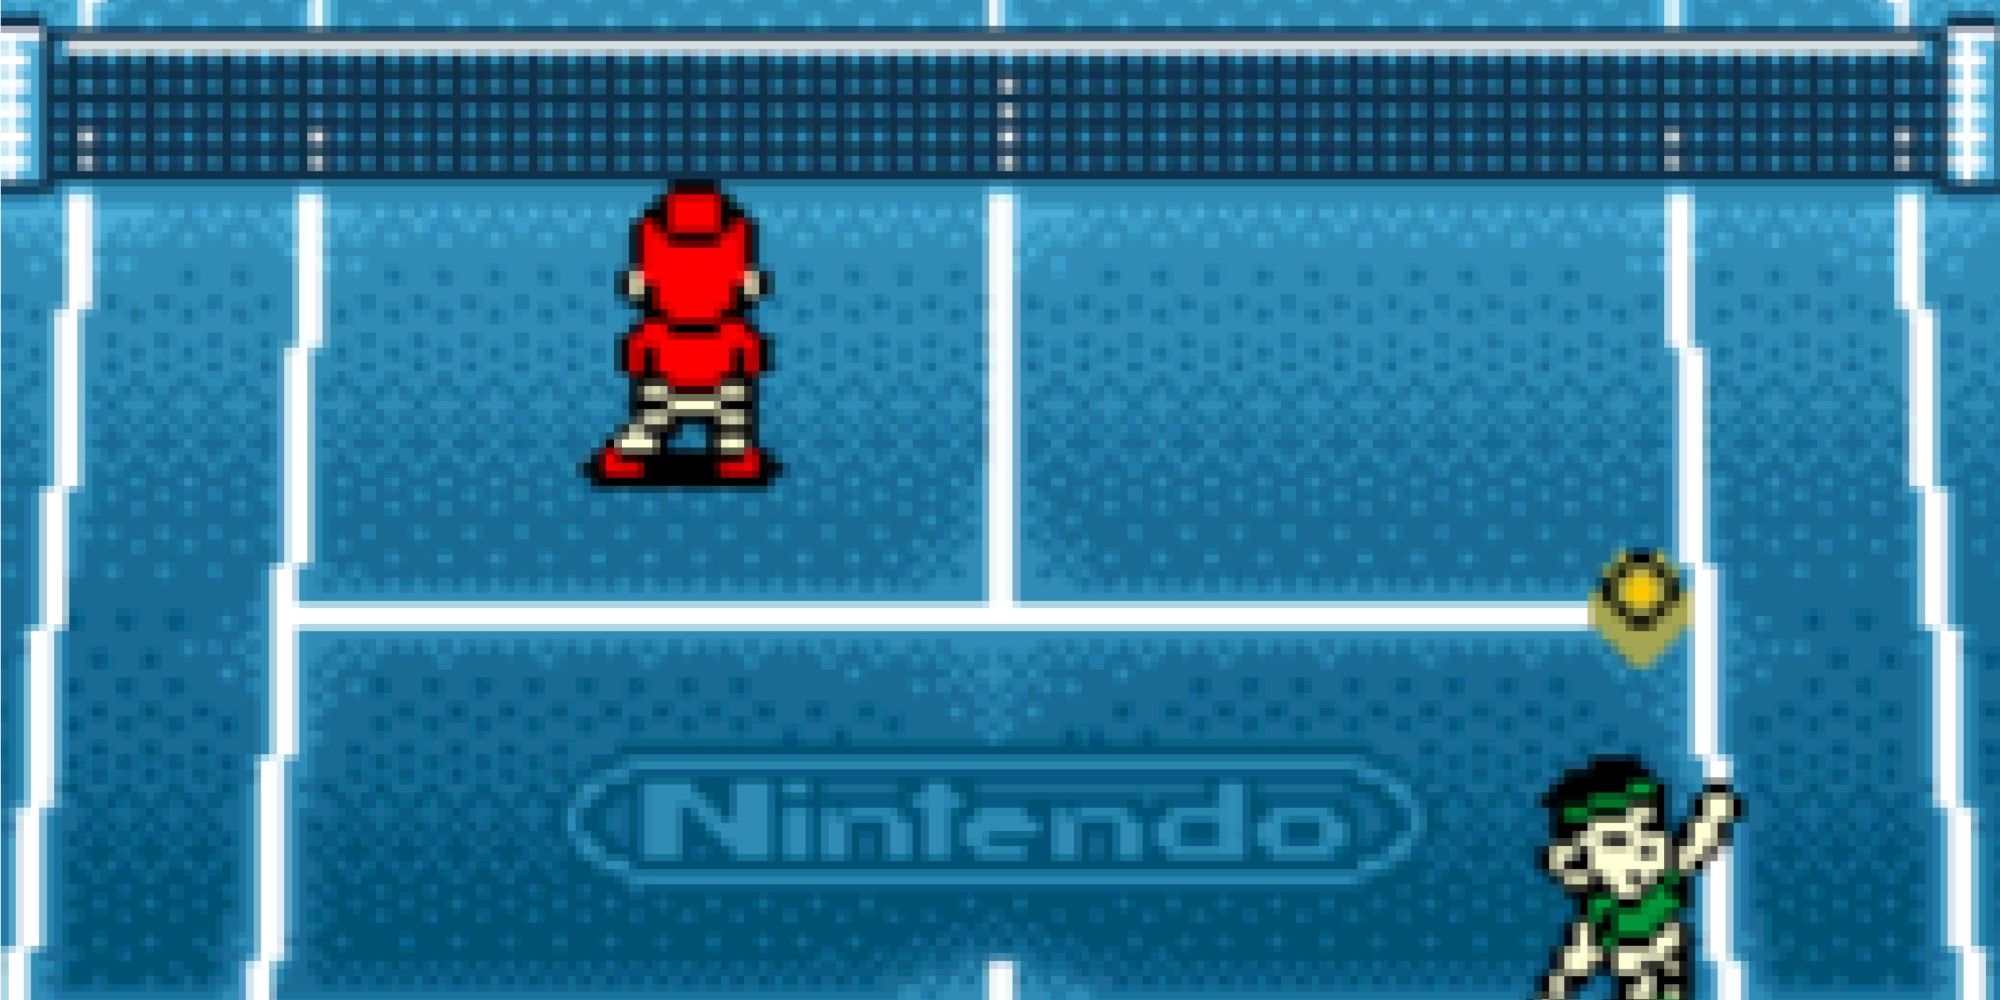 Playing a match in Mario Tennis